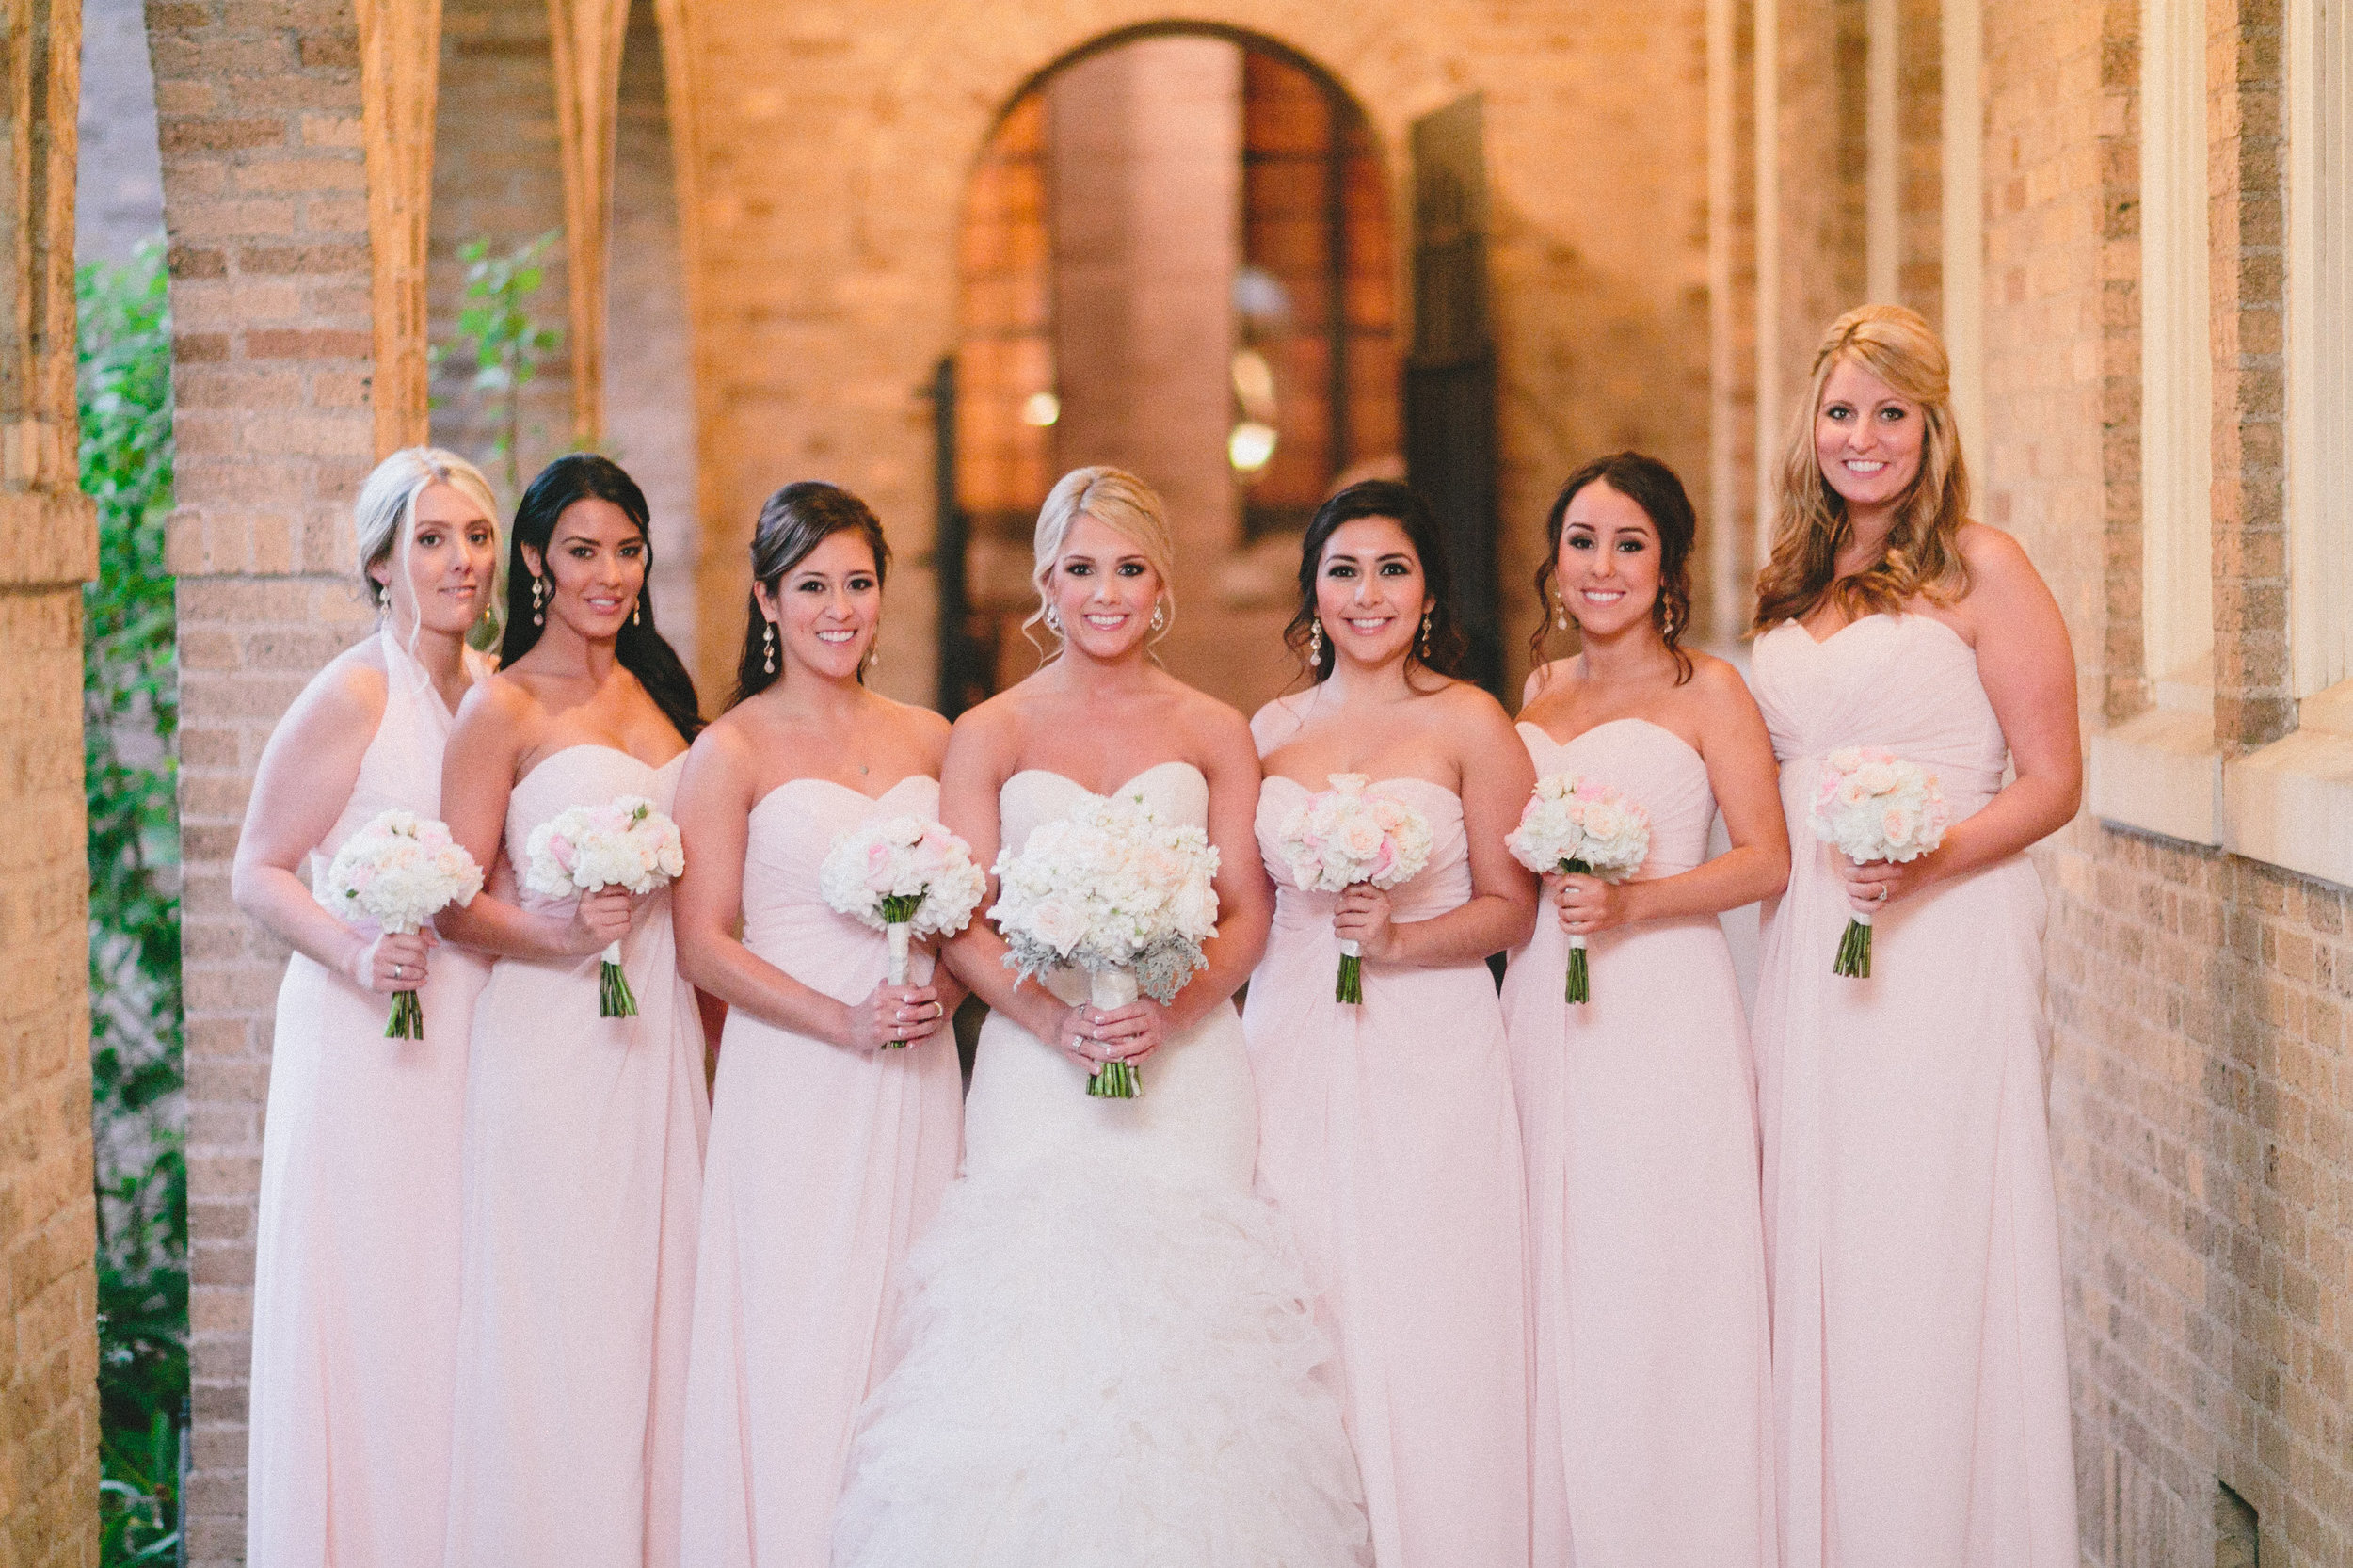 Petroleum Club of Houston Wedding | A Day To Remember | Houston Wedding Planning and Design | Dakine Films